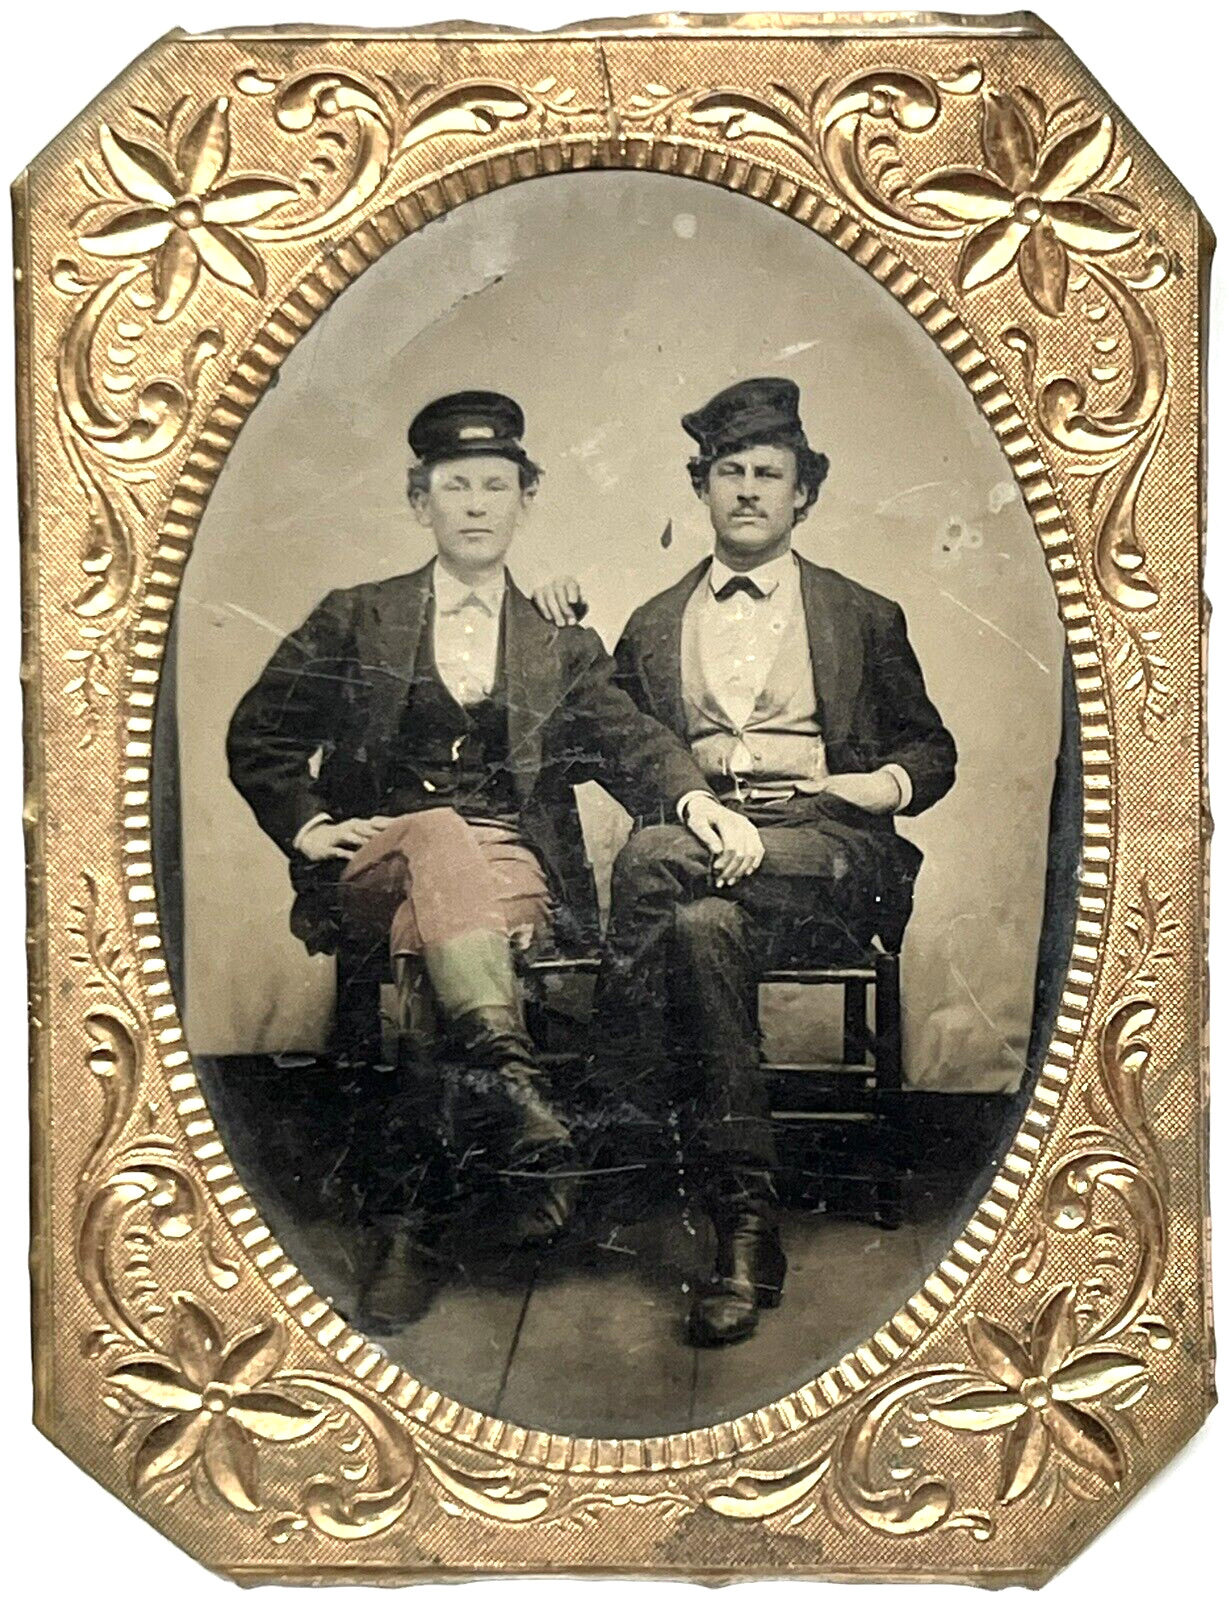 BEST BUDDIES - 1860s QUARTER PLATE TINTYPE - OCCUPATIONAL WITH WONDERFUL CONTENT